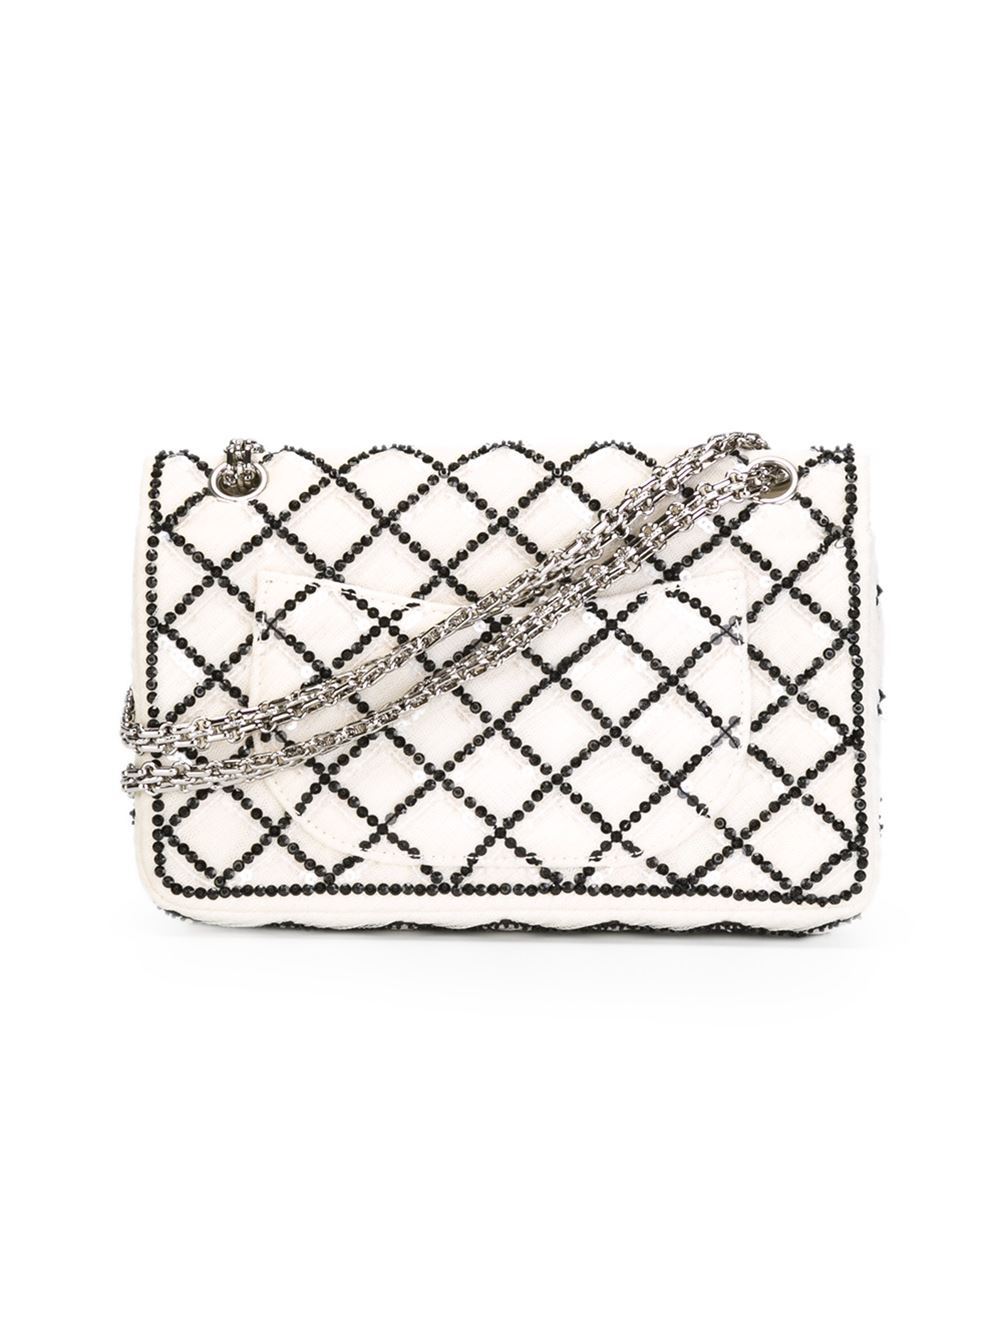 This white and black cotton sequined flap shoulder bag from Chanel features a foldover top with twist-lock closure, a quilted effect, a chain shoulder strap, a back slip pocket, an internal logo patch, multiple interior compartments, an internal